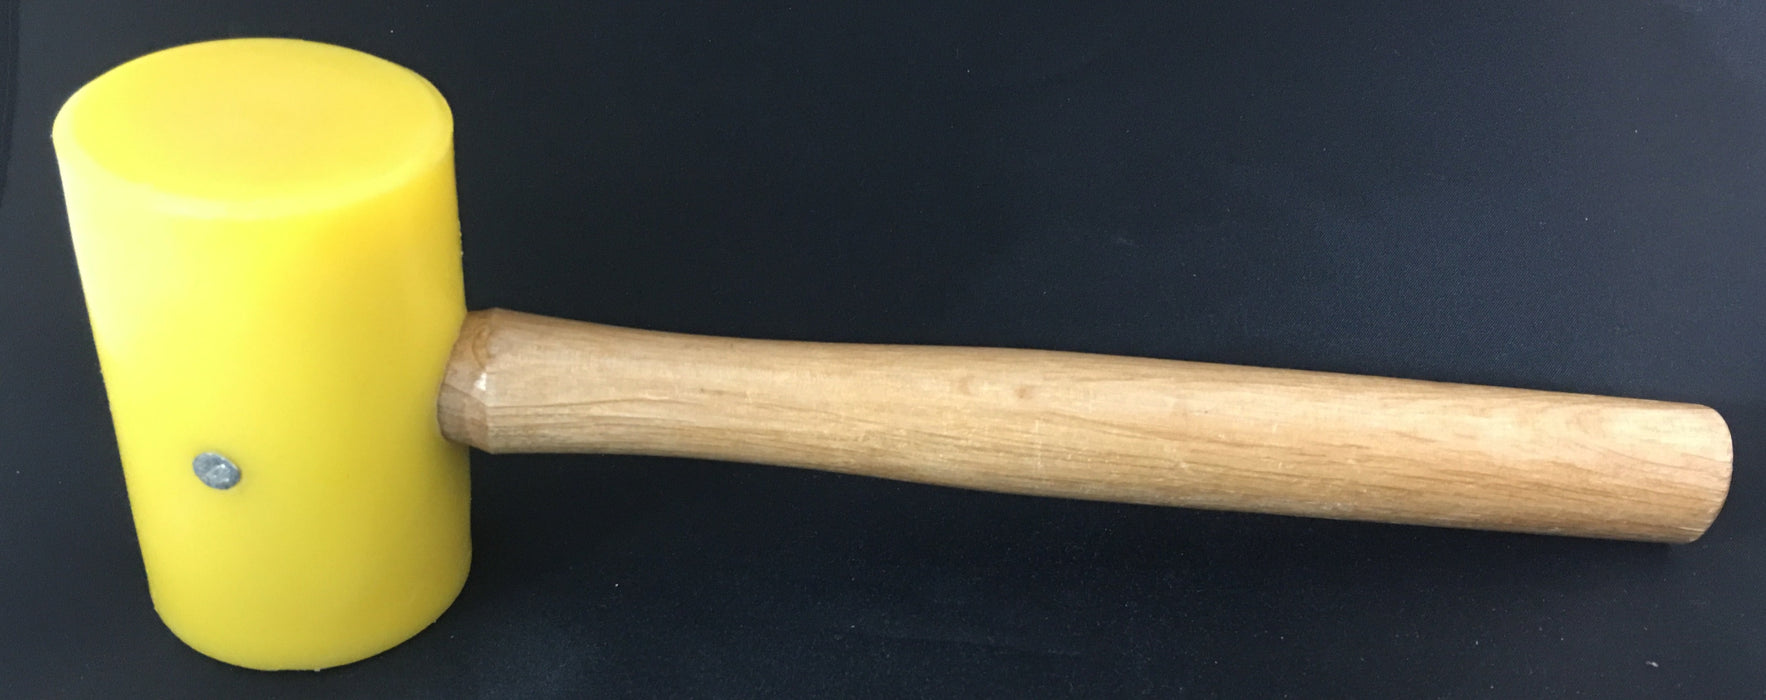 Discounted Poly Mallets - Under 7oz